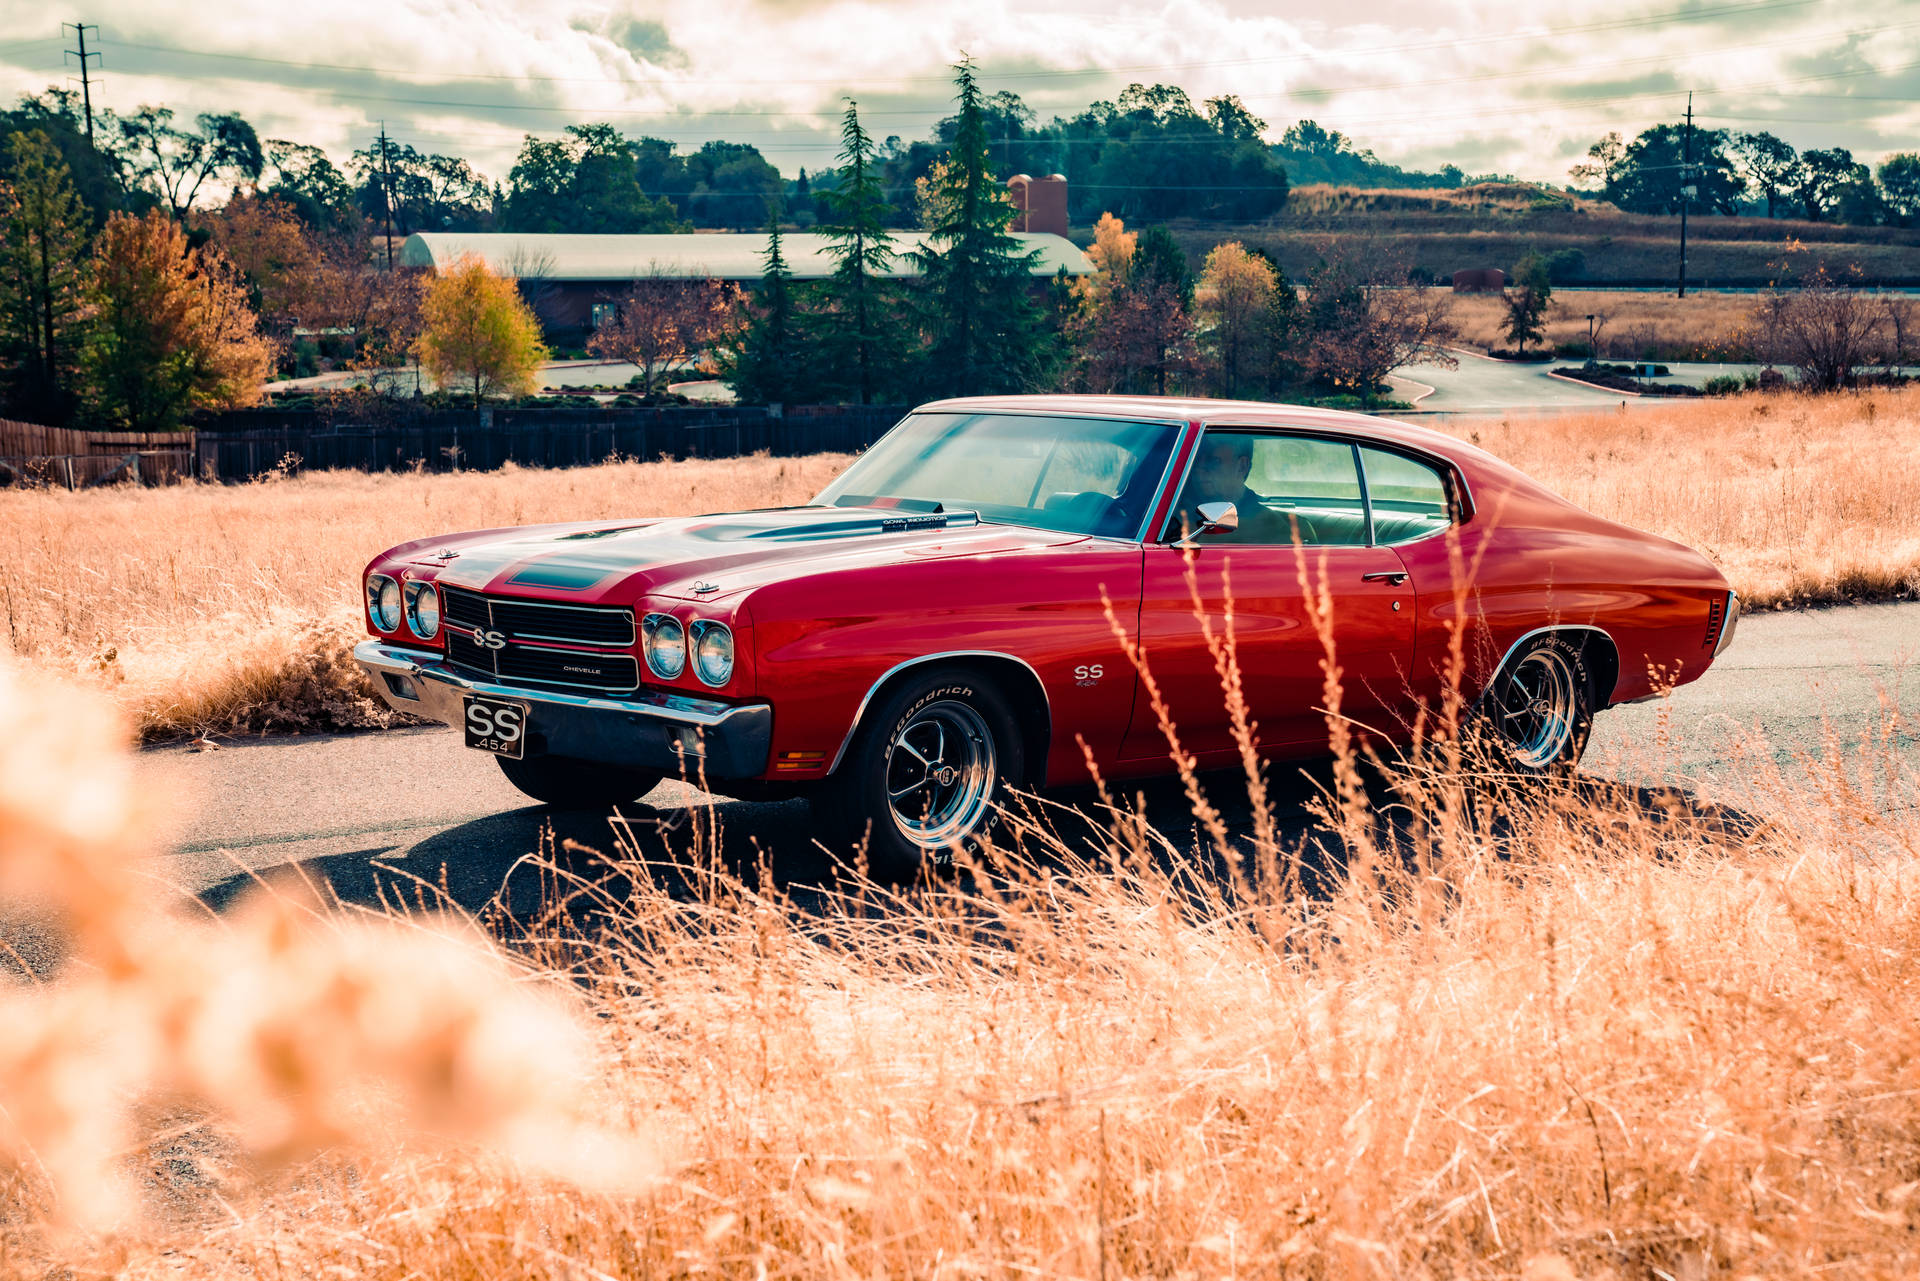 Chevrolet Chevelle On Wheat Field